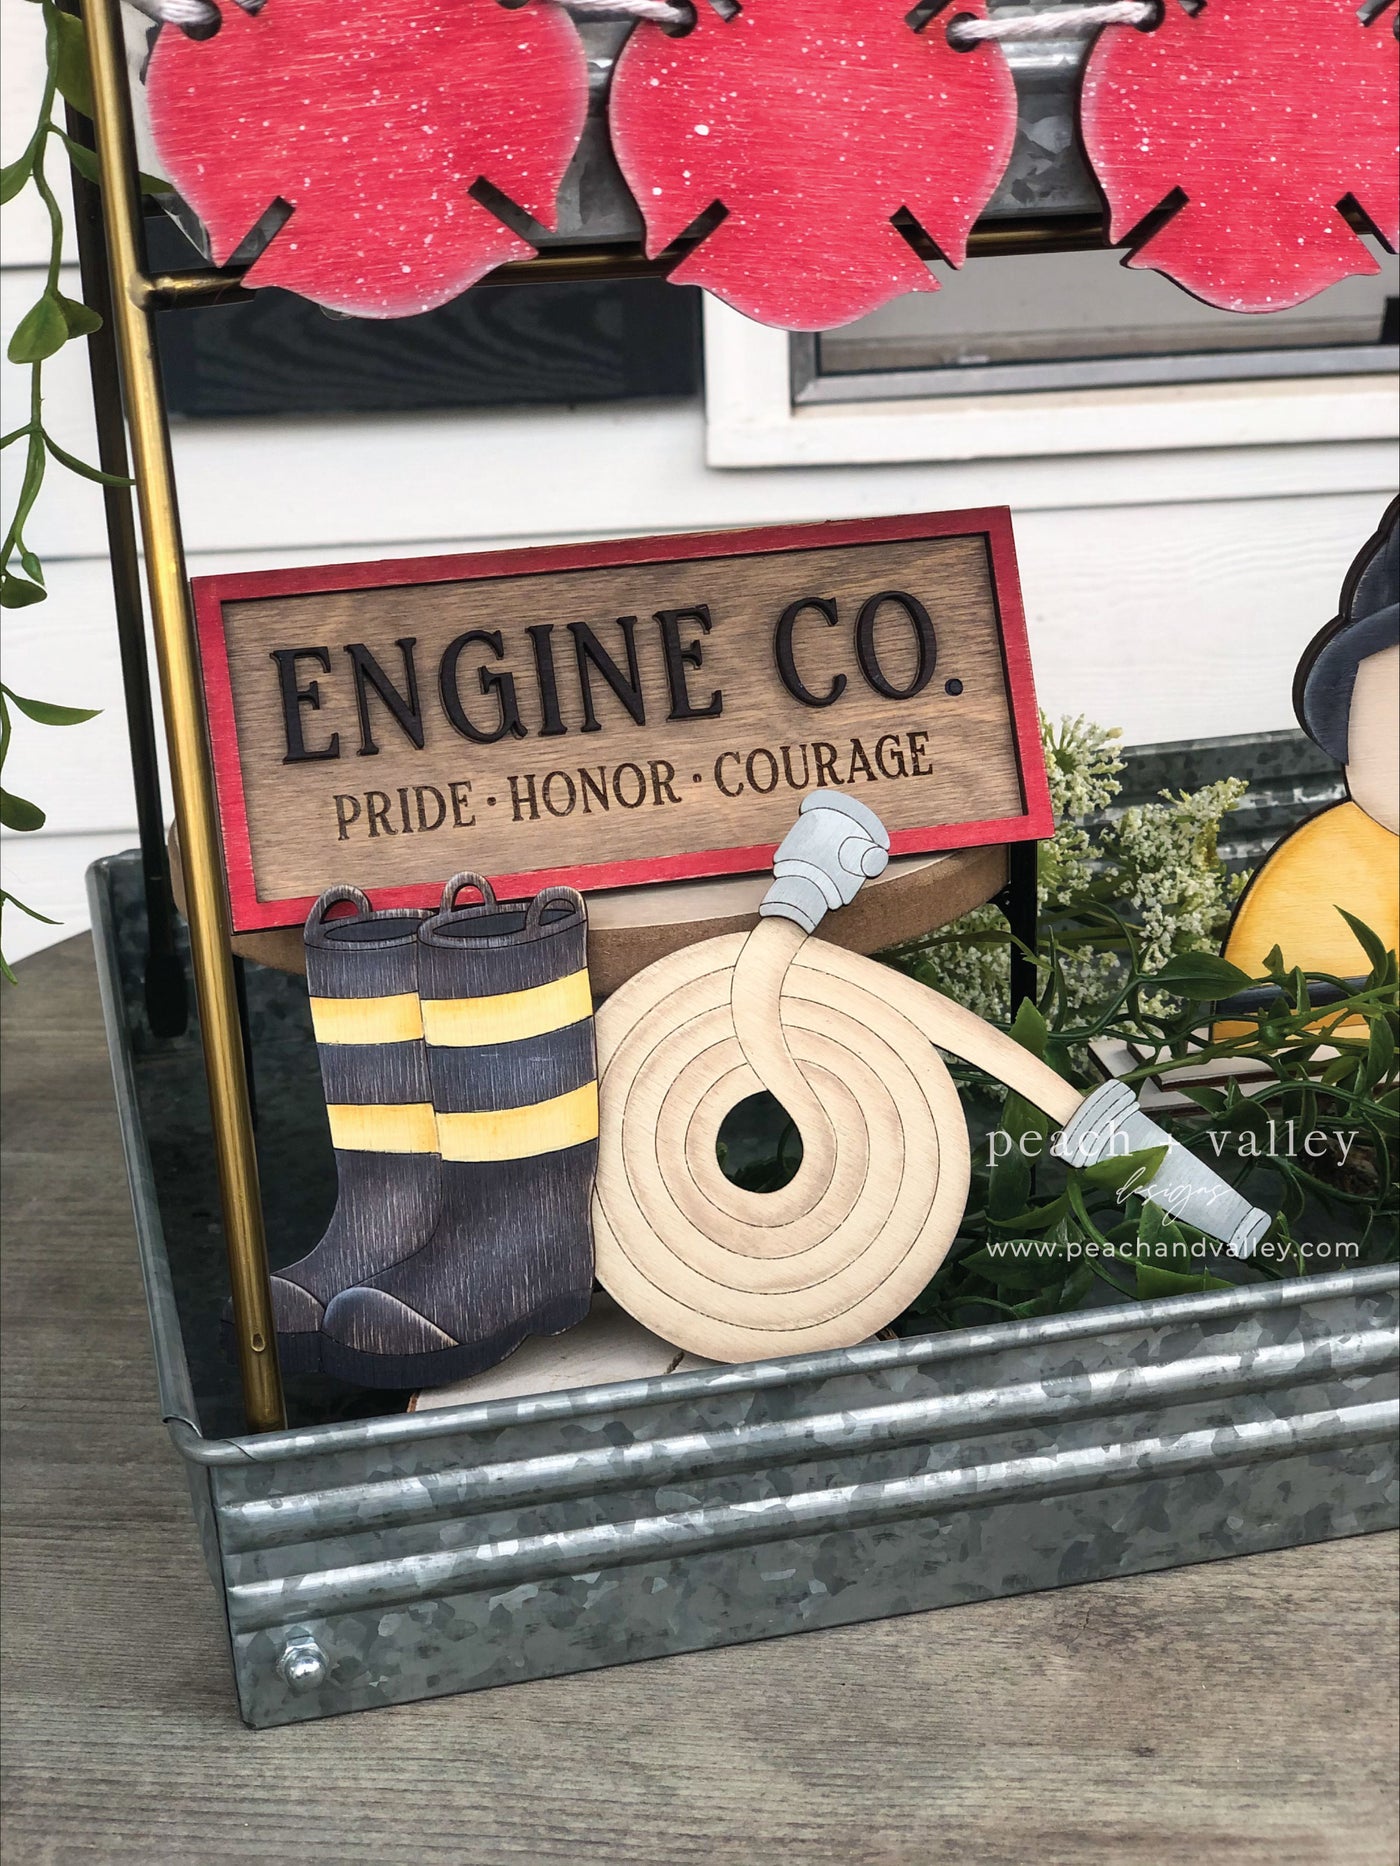 Engine Co. Sign Blank